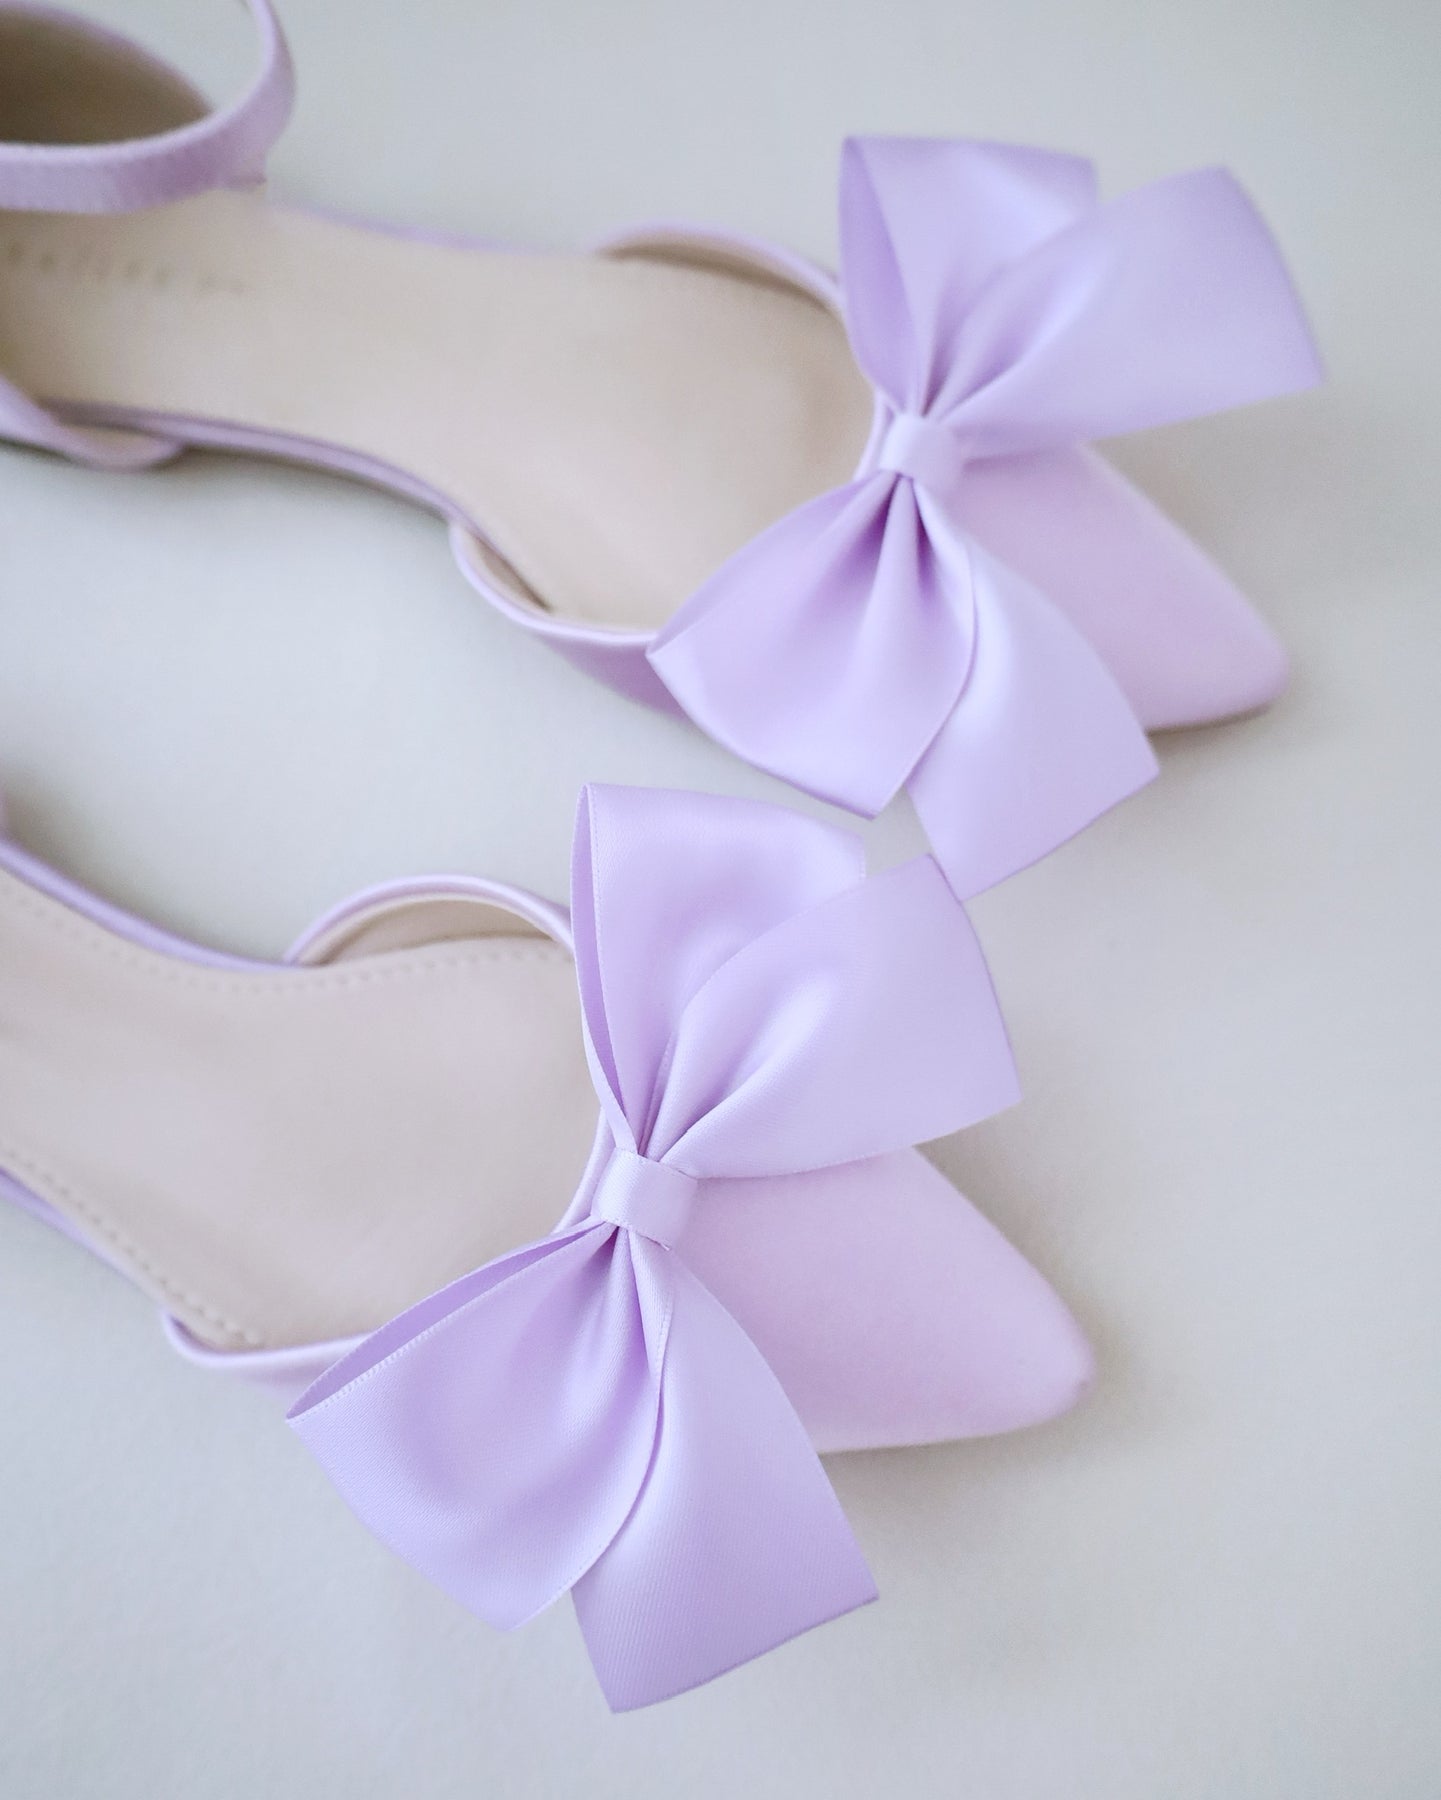 Lavender Satin Pointy Toe flats with Front Satin Bow, Bridal Shoes